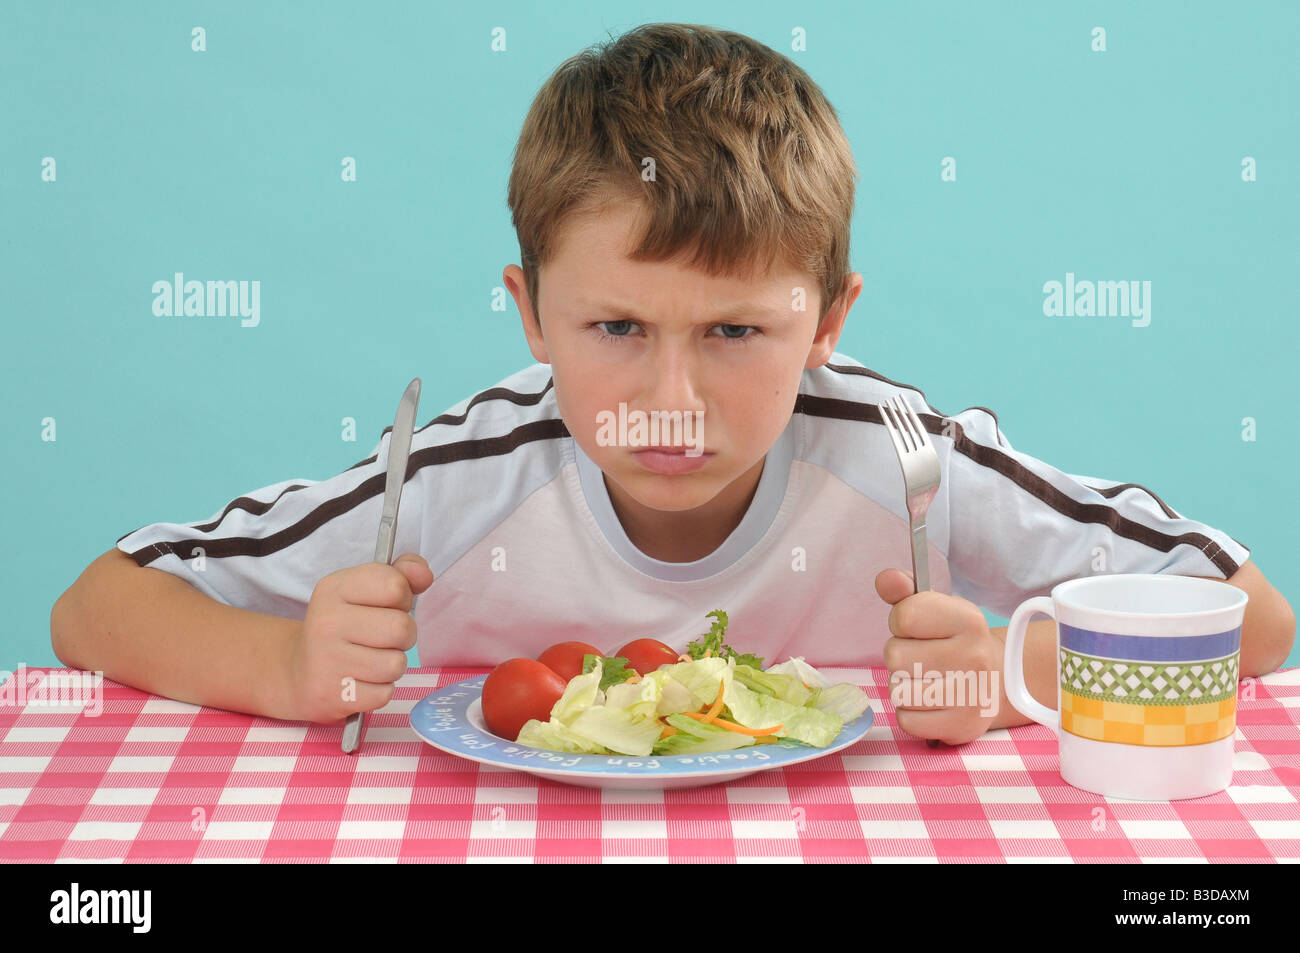 Young child with plate of salad Stock Photo